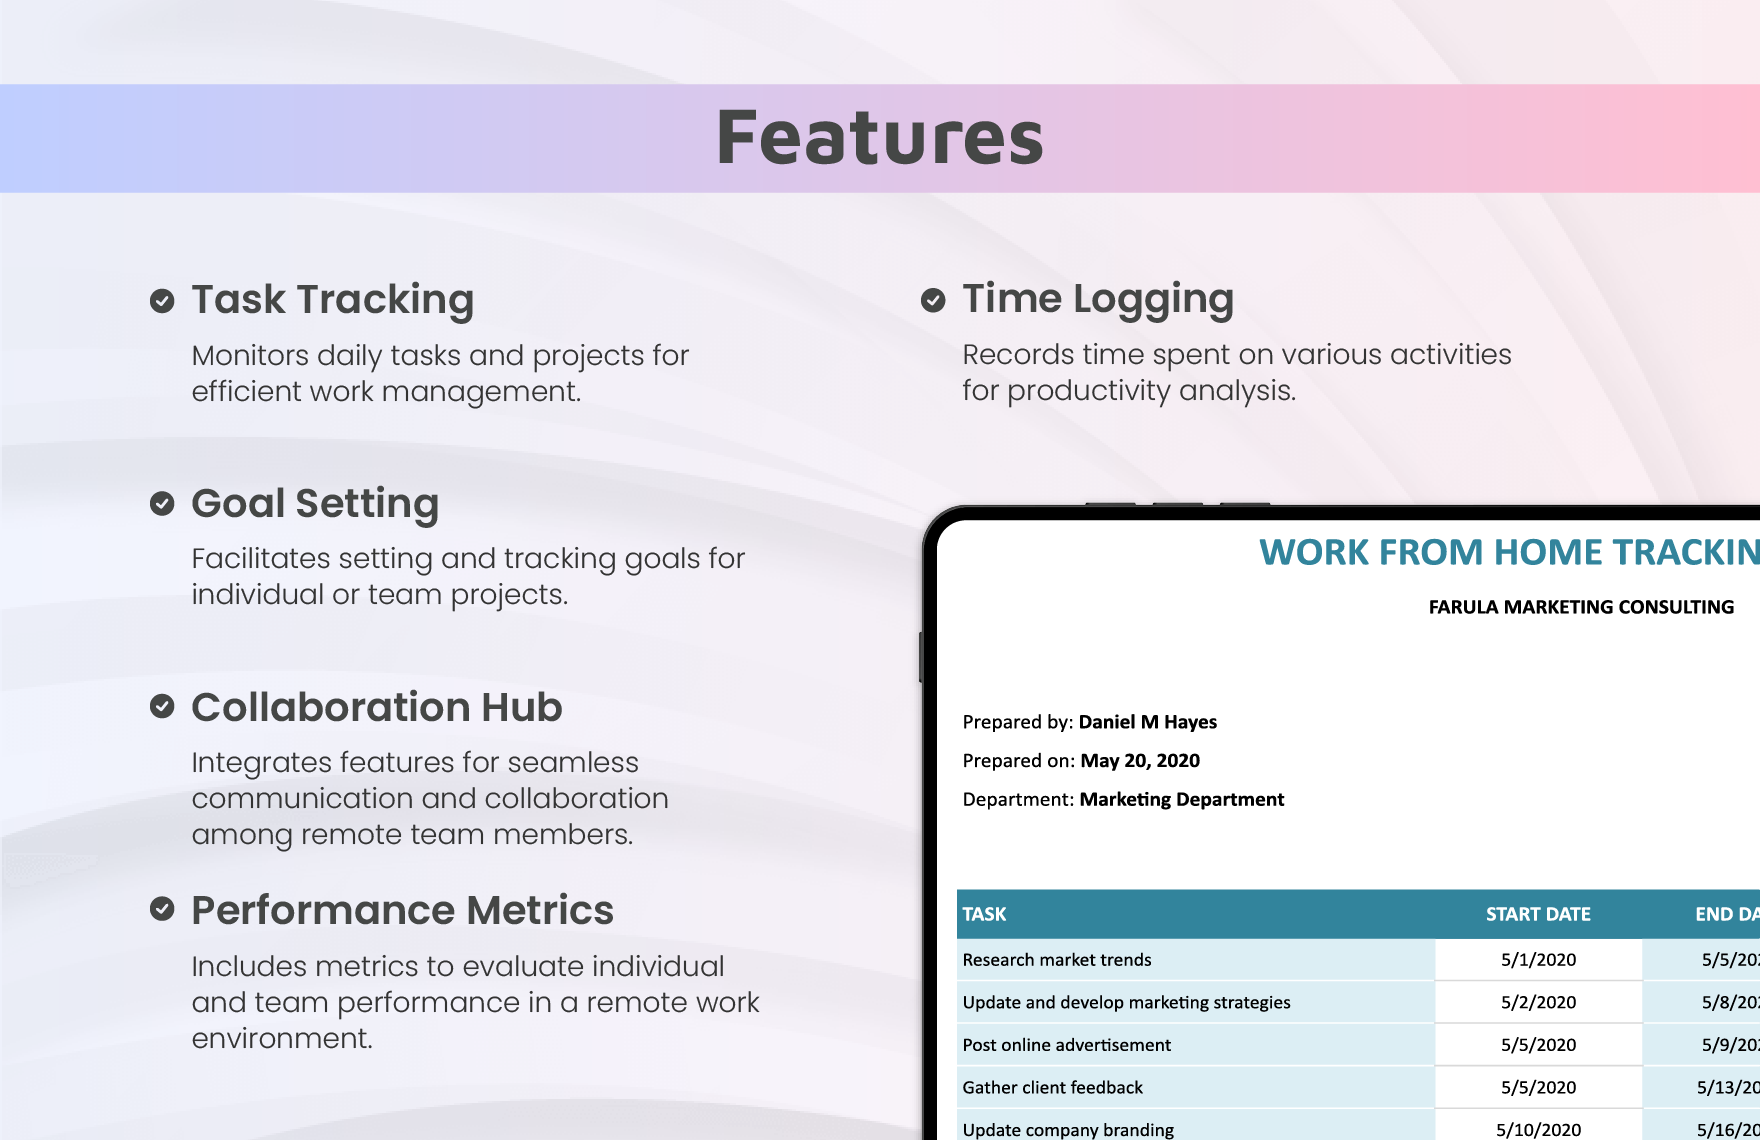 Work From Home Tracking Sheet Template